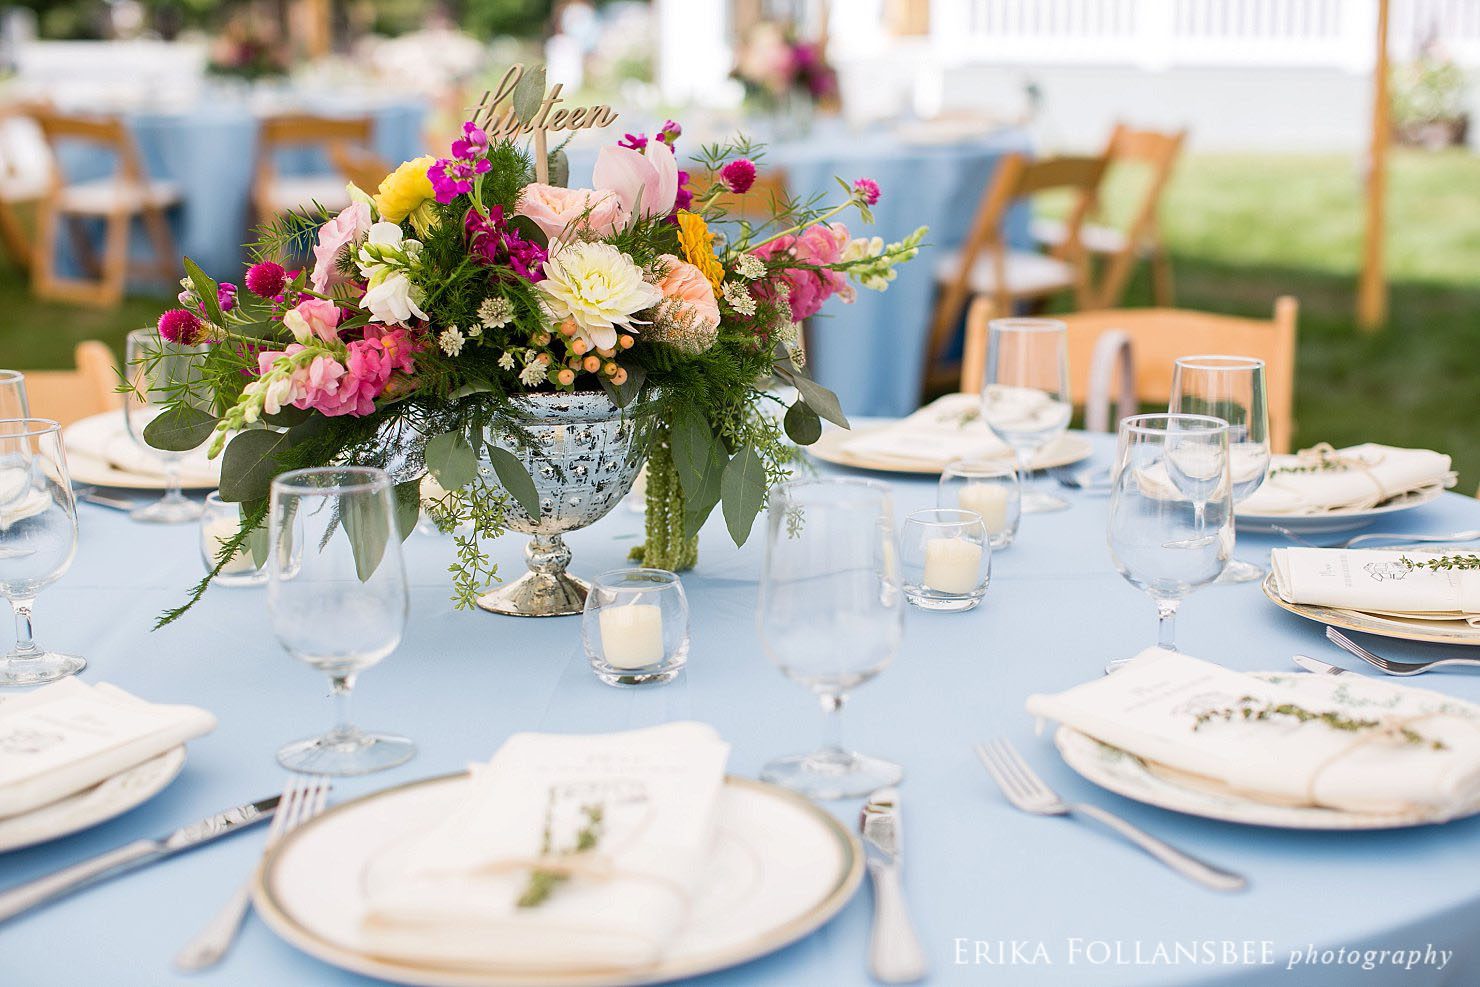 Colorful centerpieces on blue tablecloths with mismatched china plates